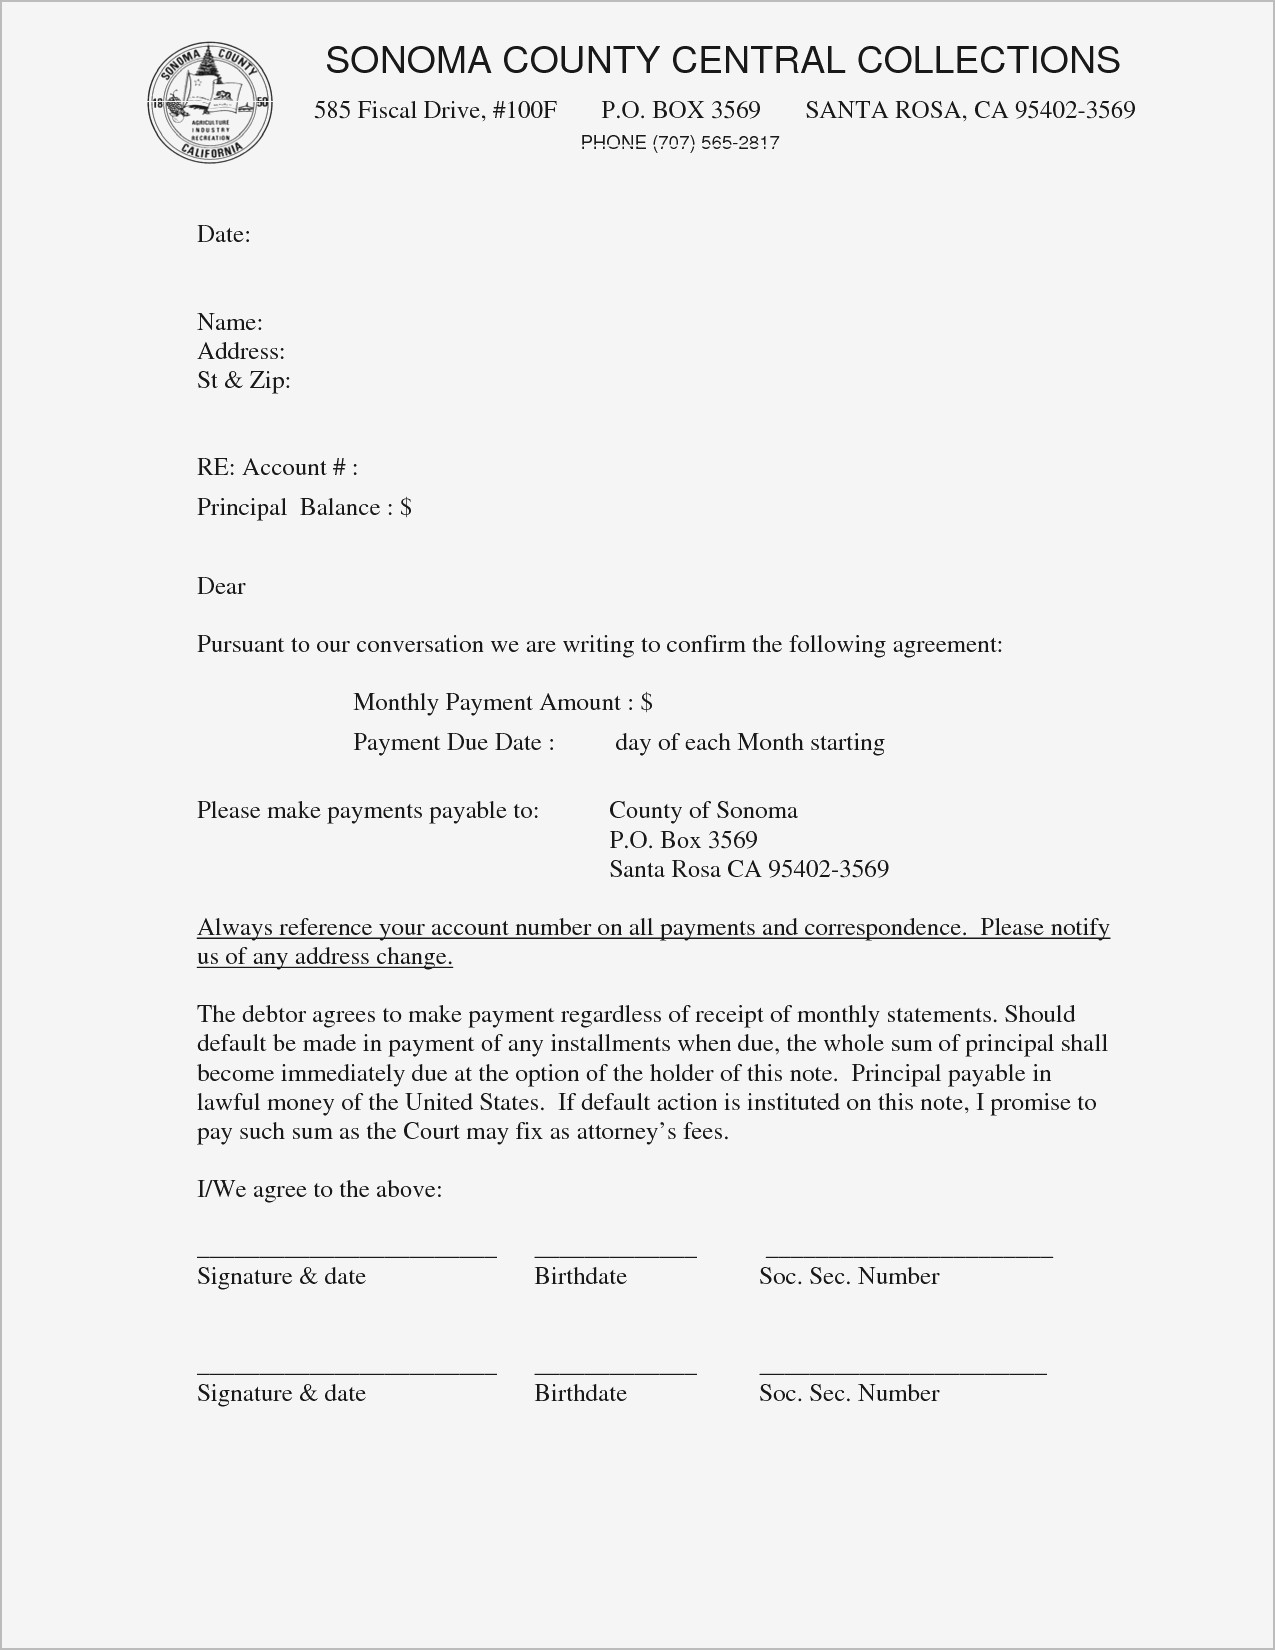 Legal Agreement Between Two Parties Sample Business Agreement Contract Between Two Companies Doc Free